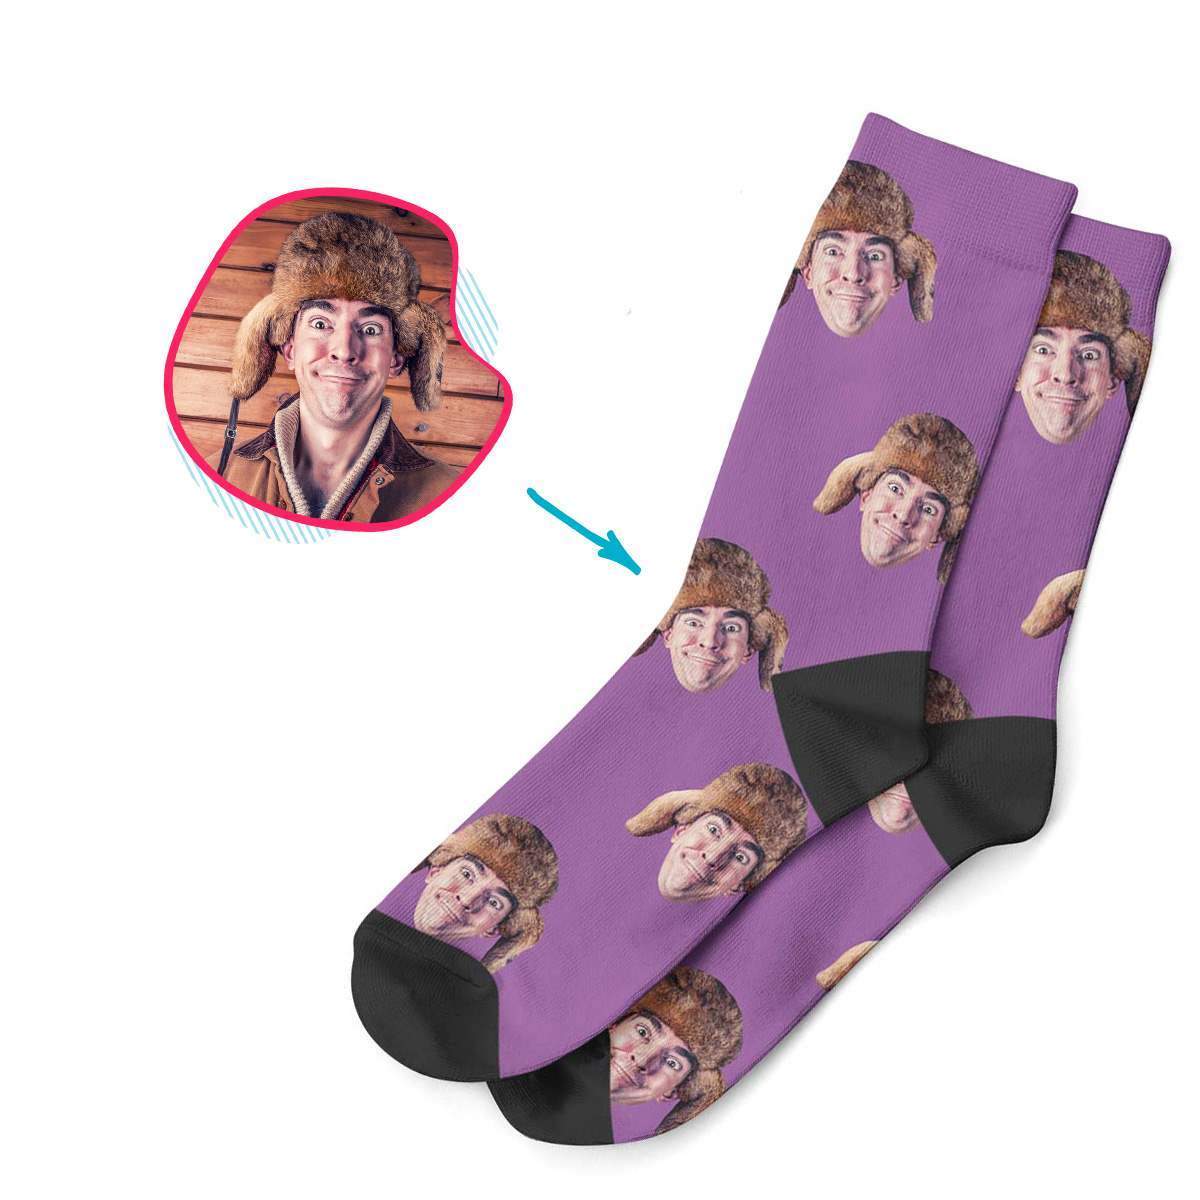 purple Blank design socks personalized with photo of face printed on them